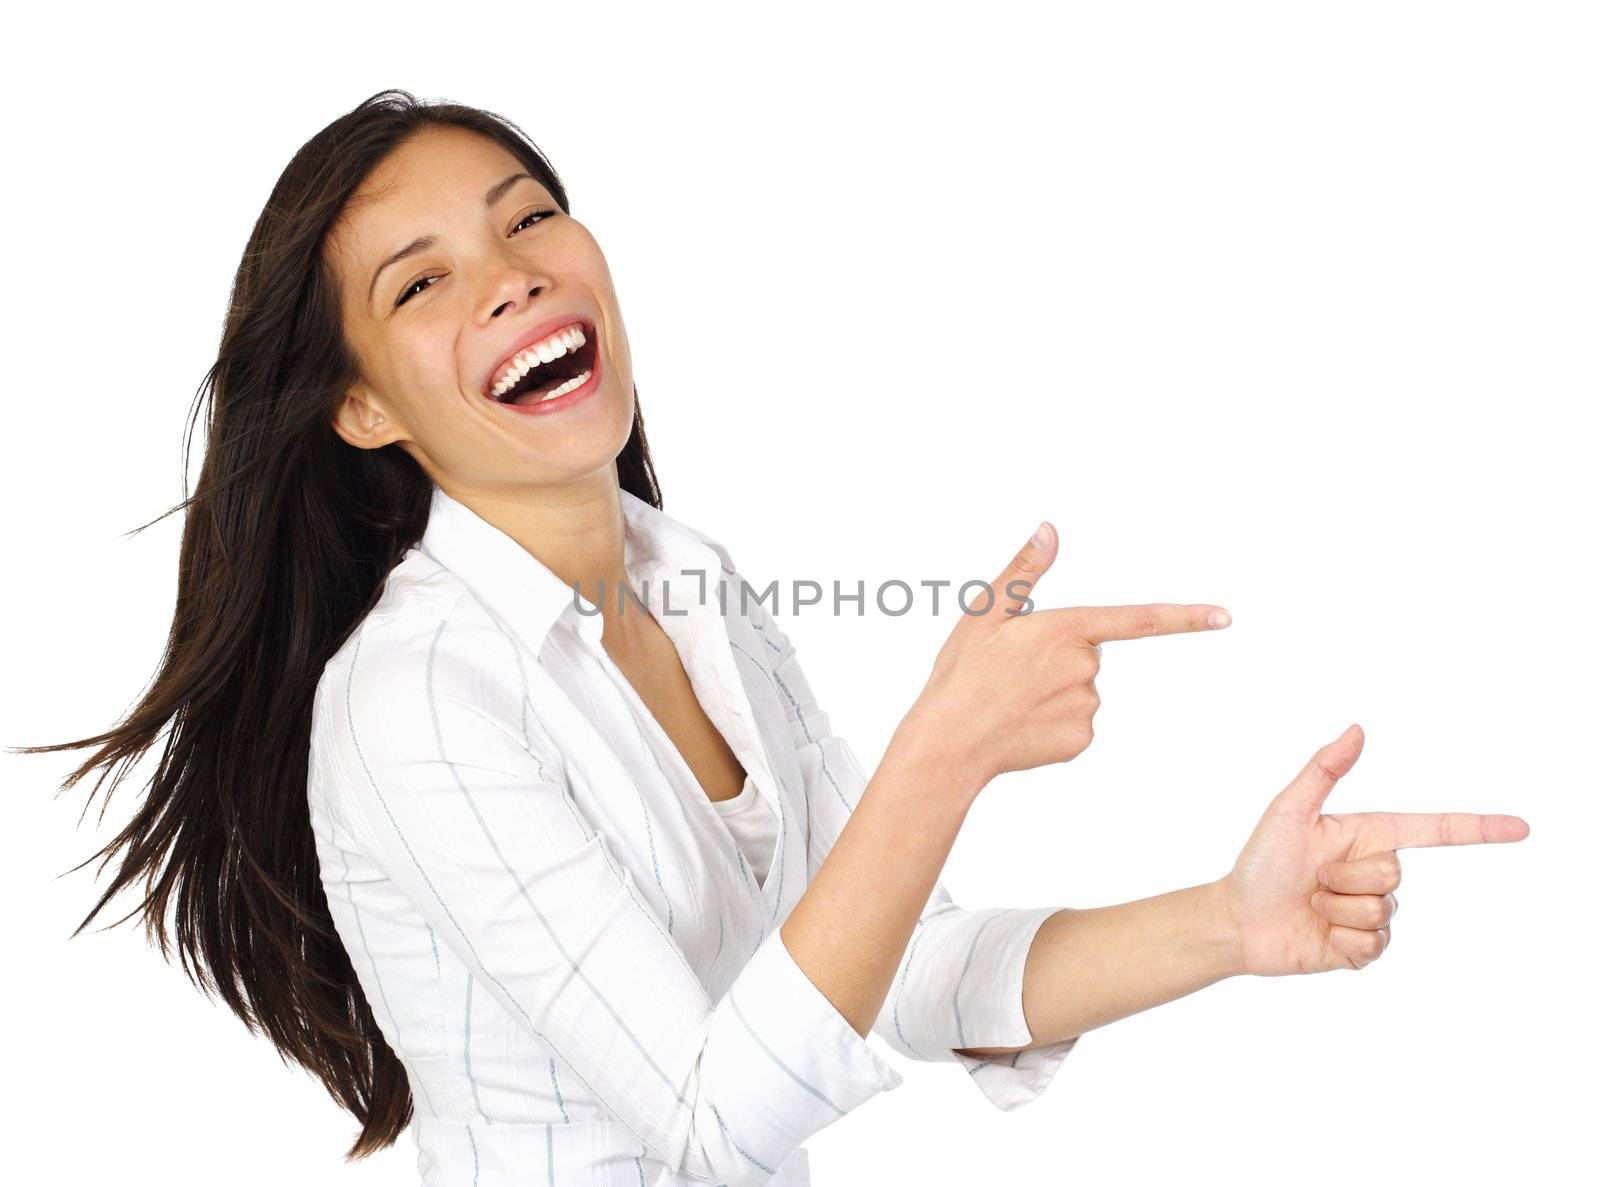 Laughing woman in white pointing at your product while looking at the camera. Isolated on white background. Beautiful mixed asian / caucasian model.